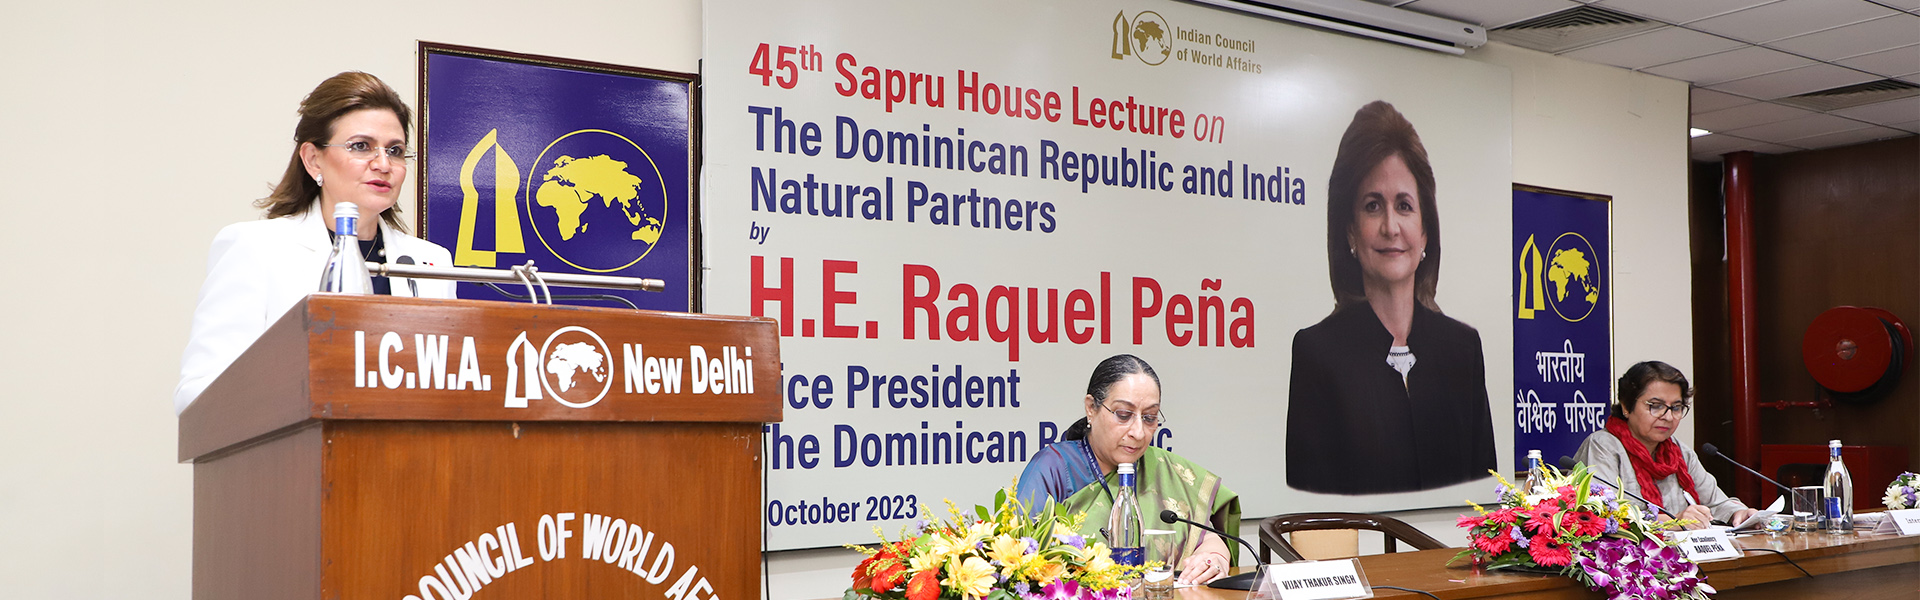 H.E. Raquel Pena, Vice President, The Dominican Republic delivering Sapru House Lecture on ‘The Dominican Republic and India: Natural Partners’ at Sapru House, 4 October 2023.